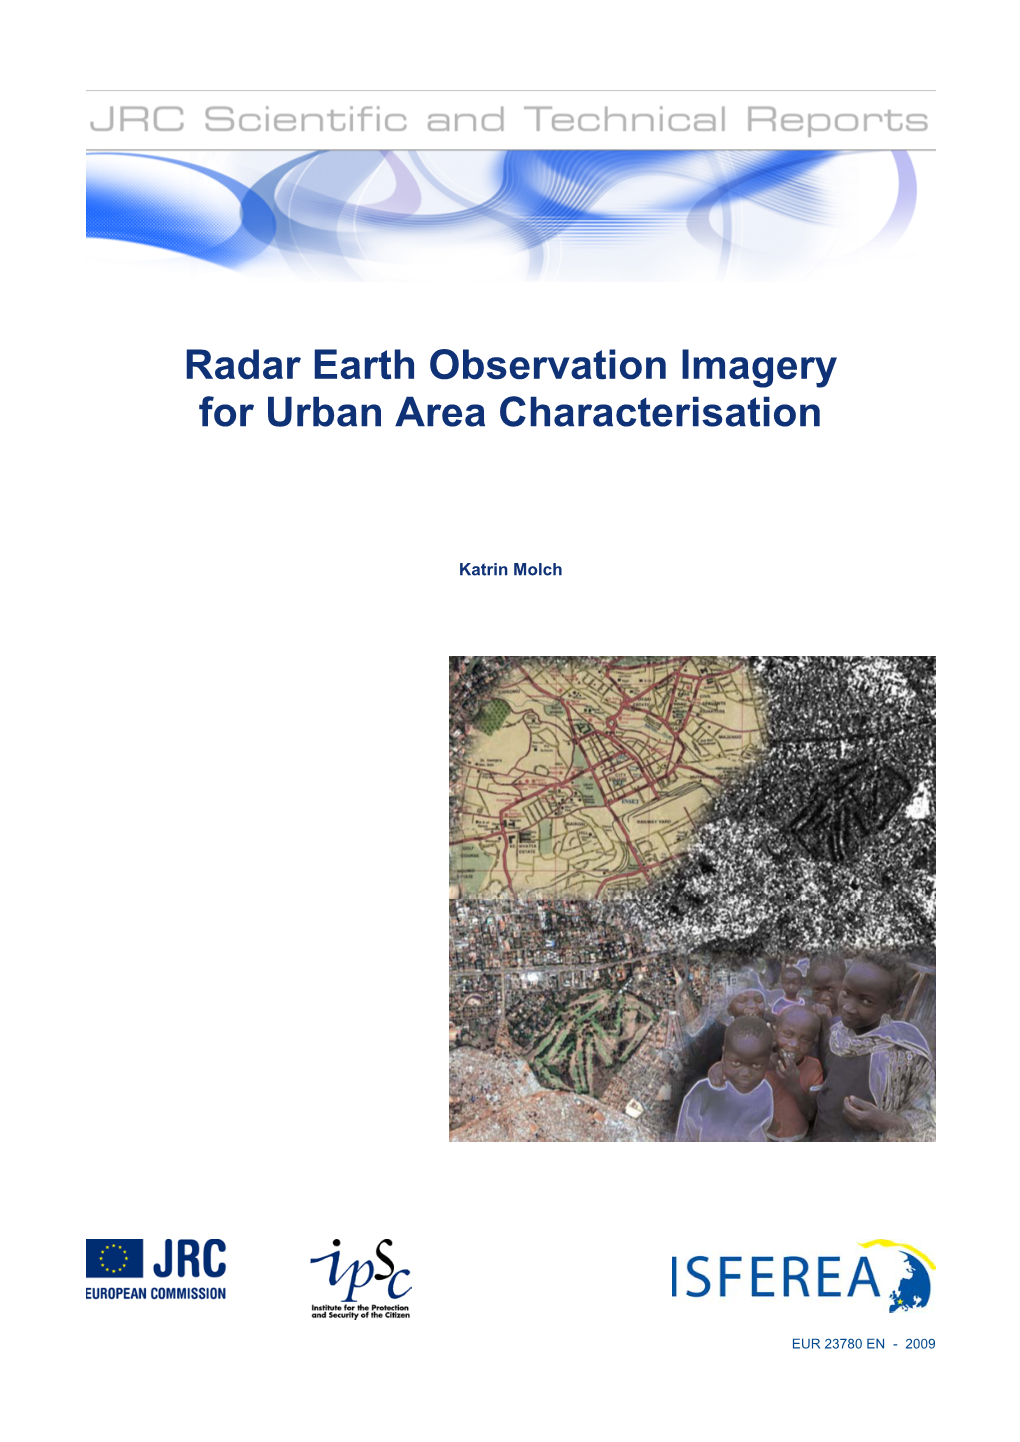 Radar Earth Observation Imagery for Urban Area Characterisation